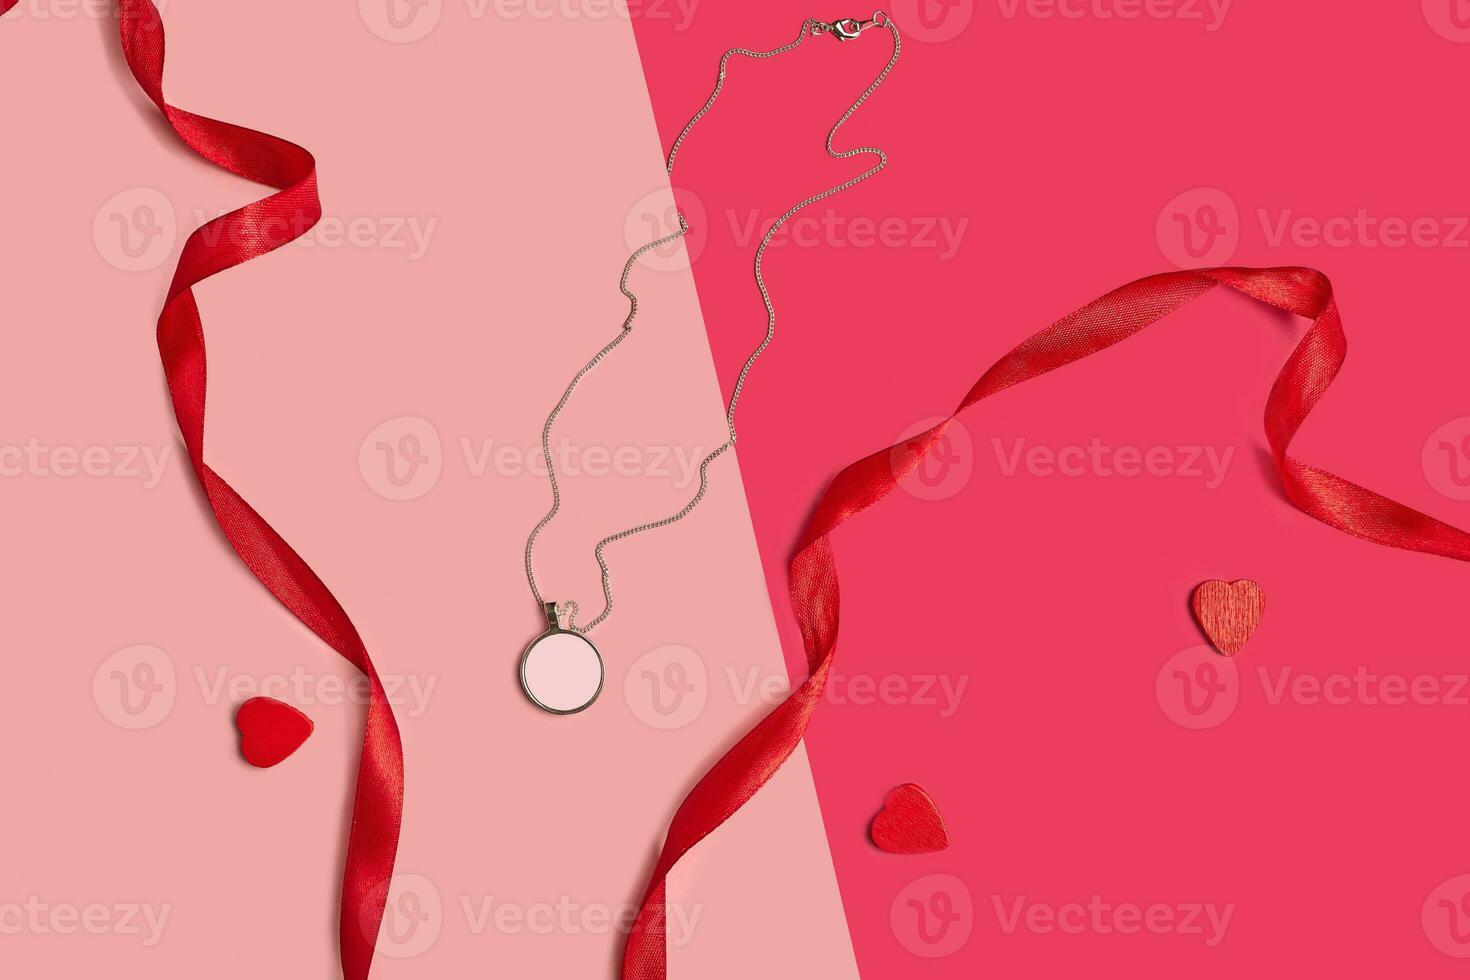 Blank pendant or medallion on a chain next to red ribbons and cut out cardboard hearts against colorful studio background. Close up, copy space photo